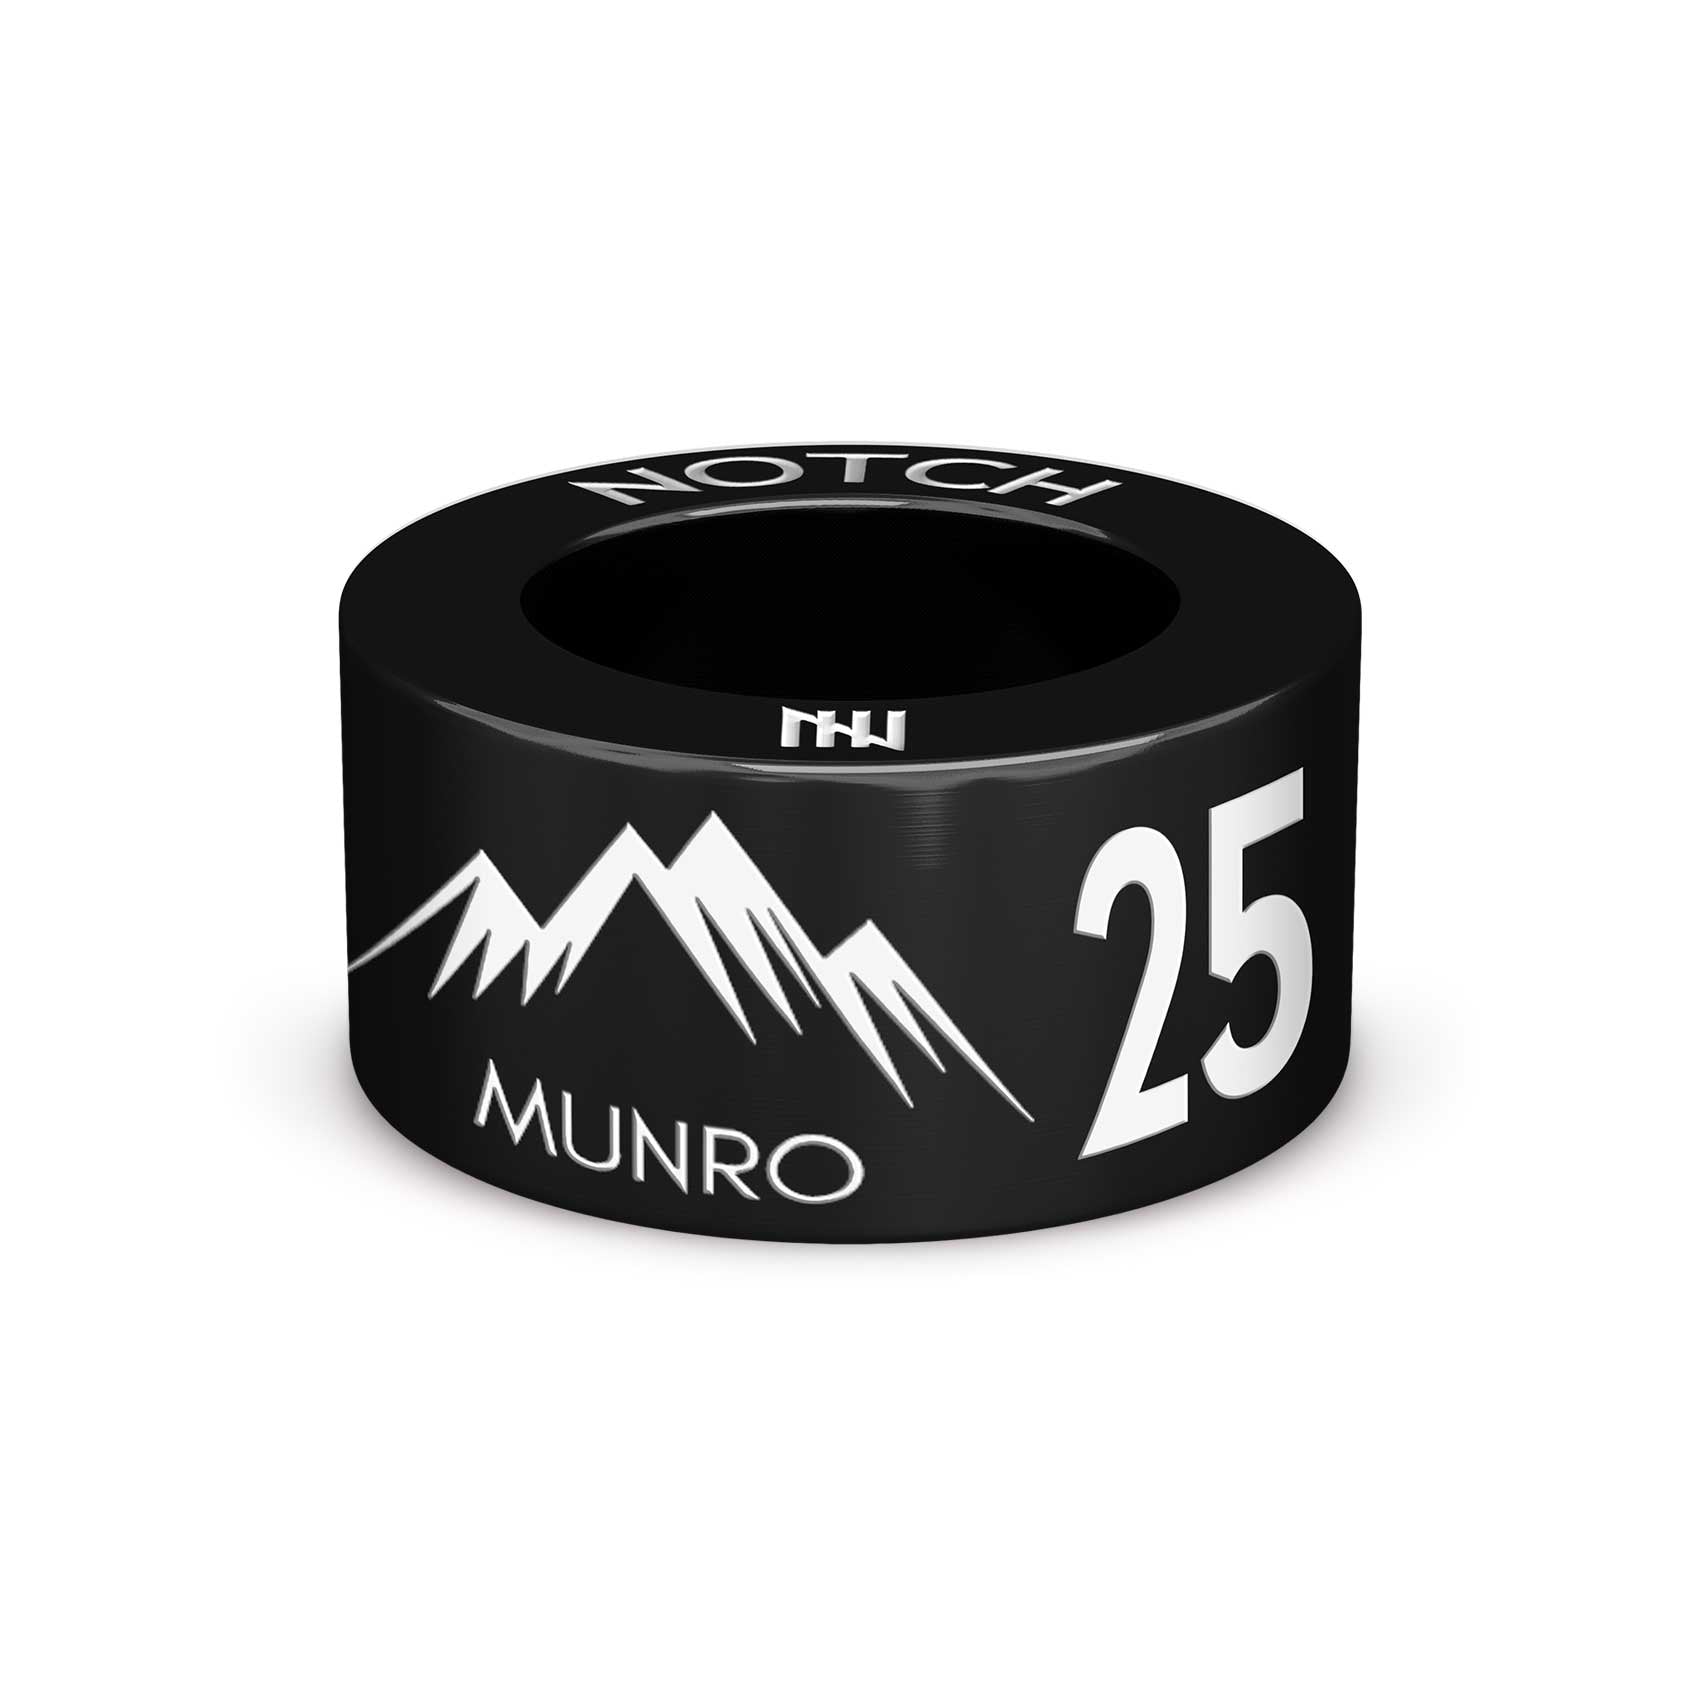 Number of Munros Bagged NOTCH Charm (Full List)